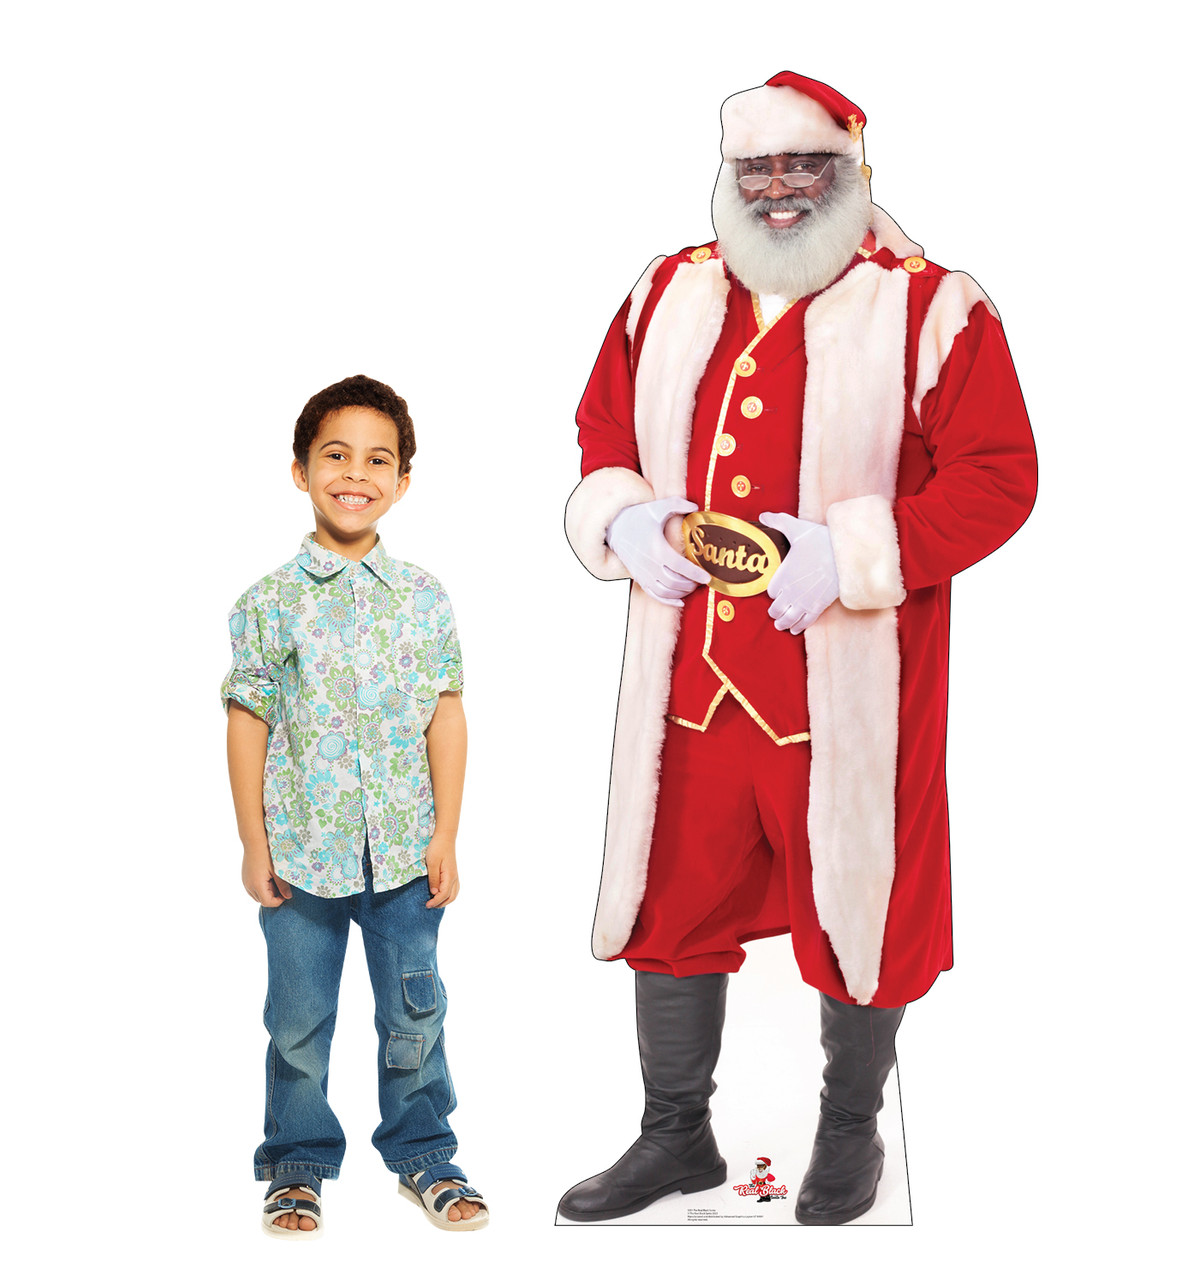 Life-size cardboard standee of The Real Black Santa with model.